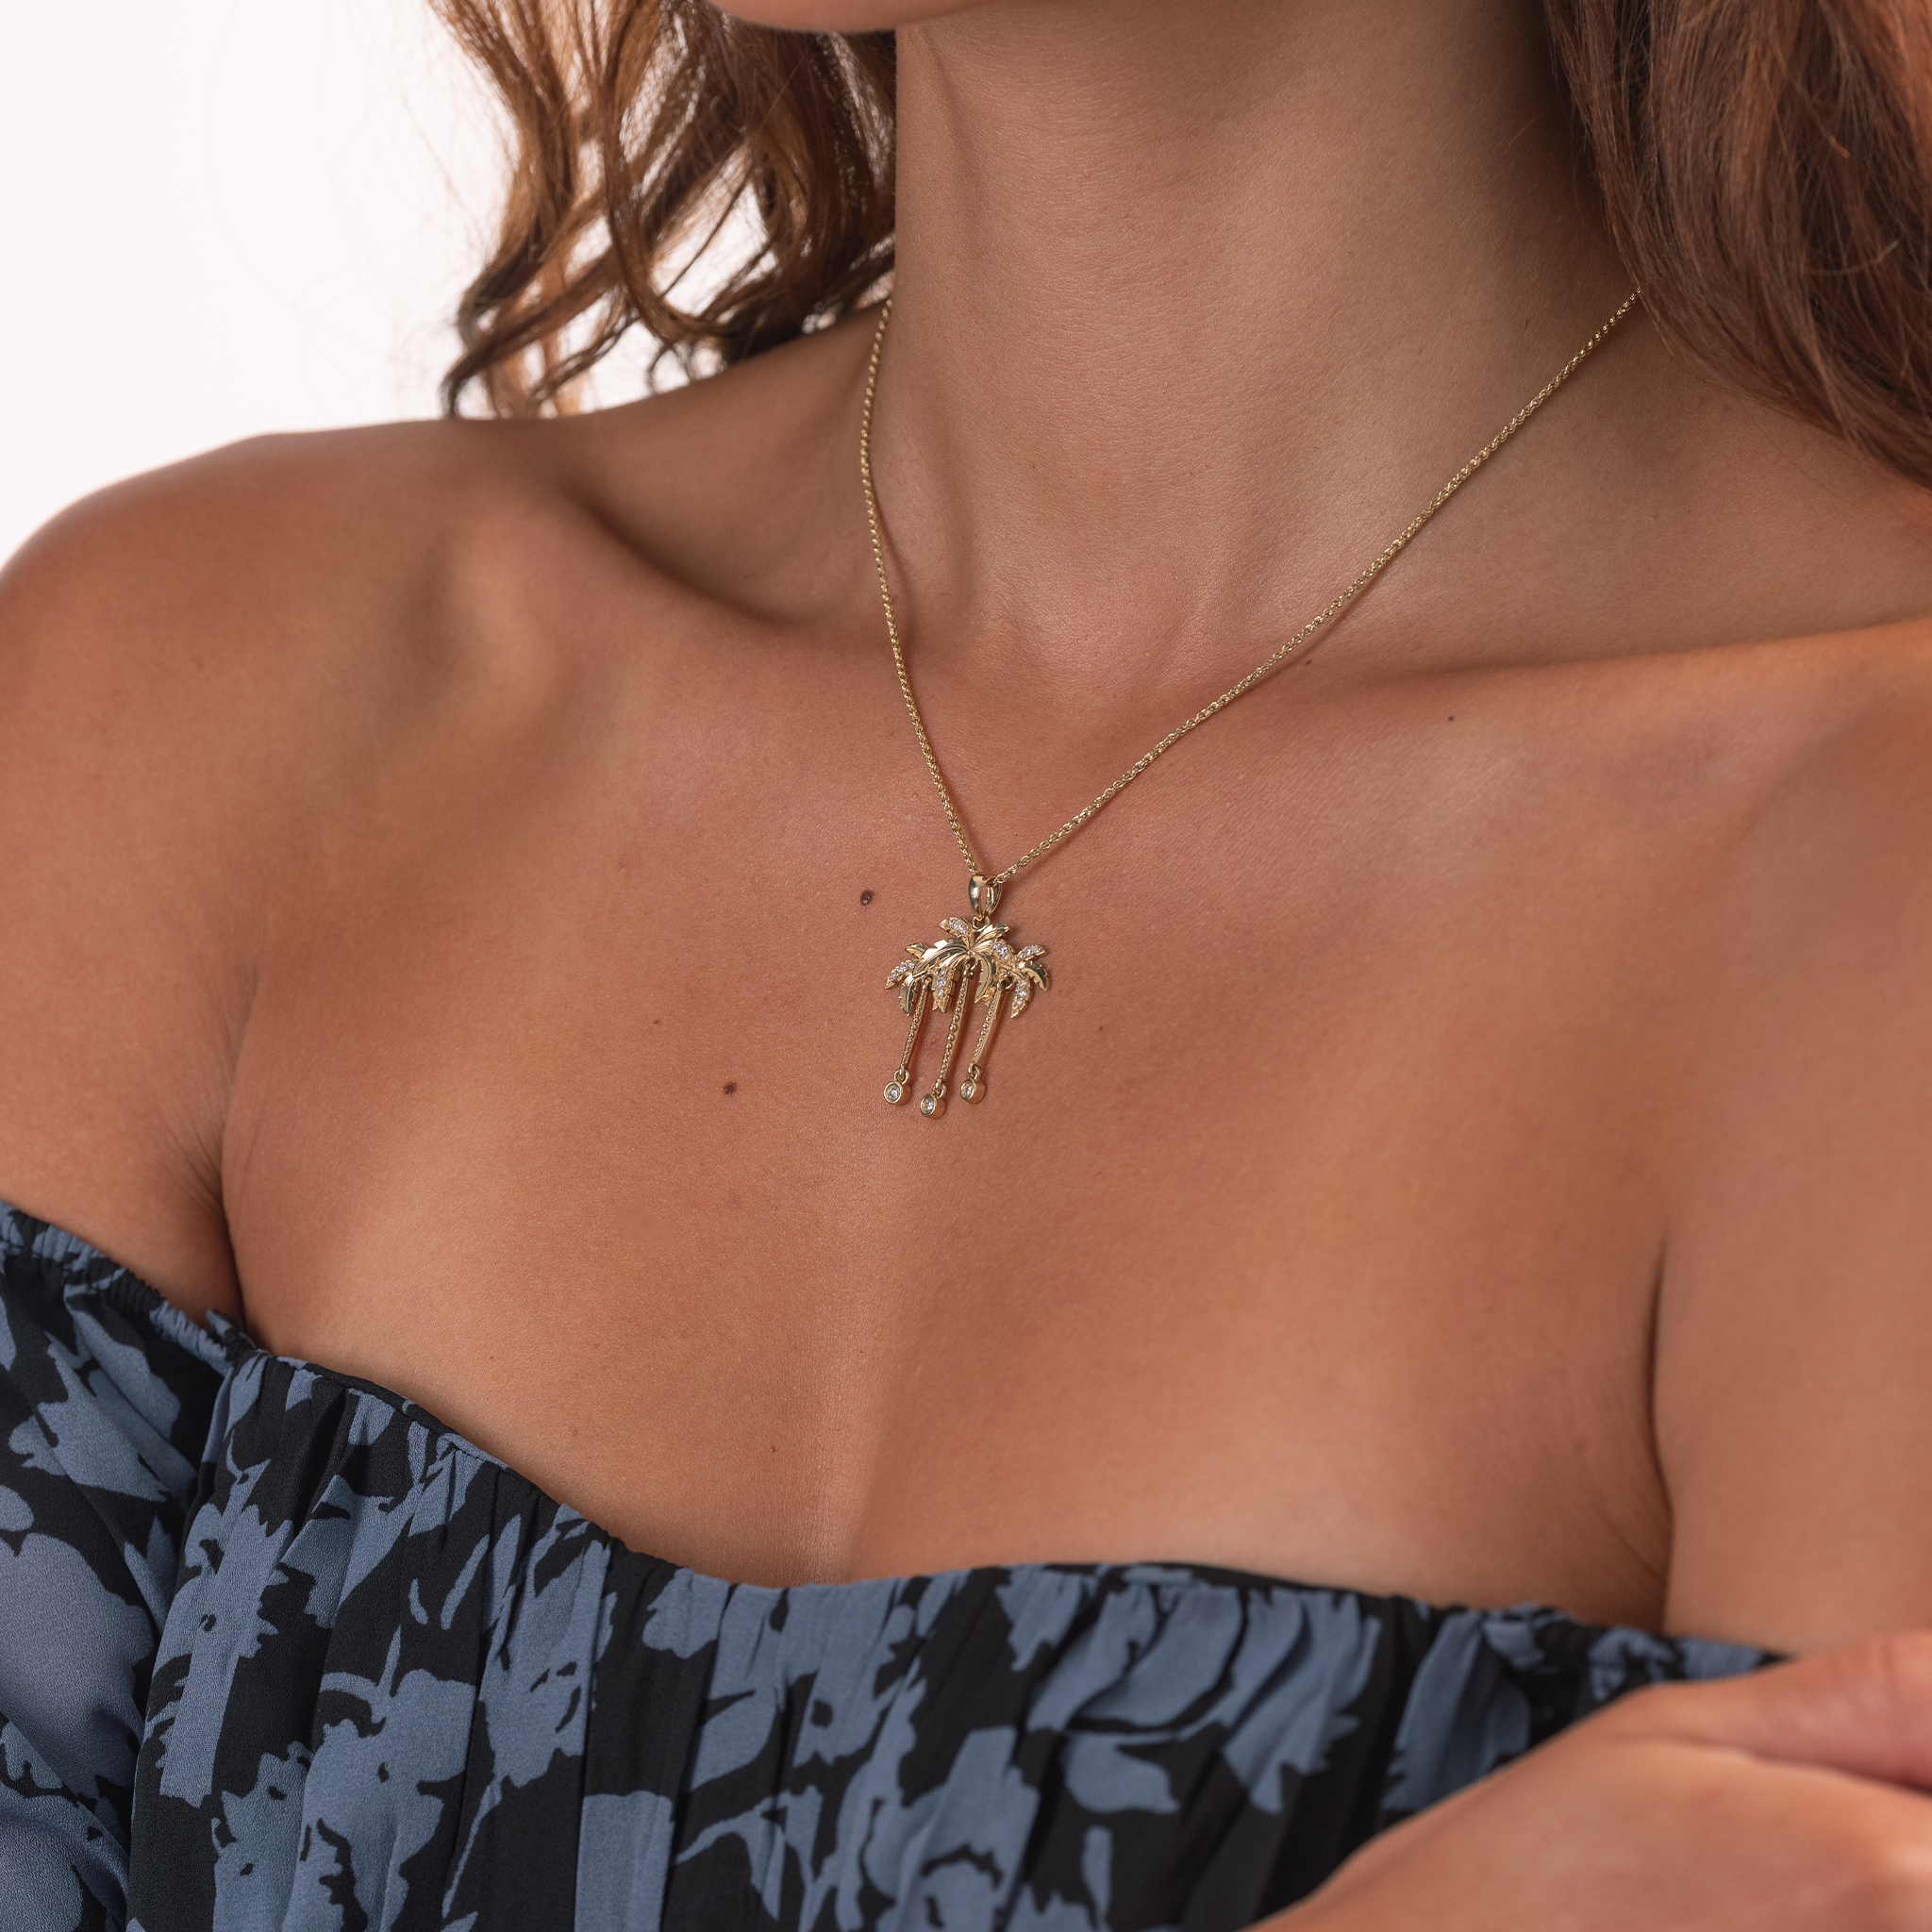 Paradise Palms - Palm Tree Pendant in Gold with Diamonds - 24-28mm